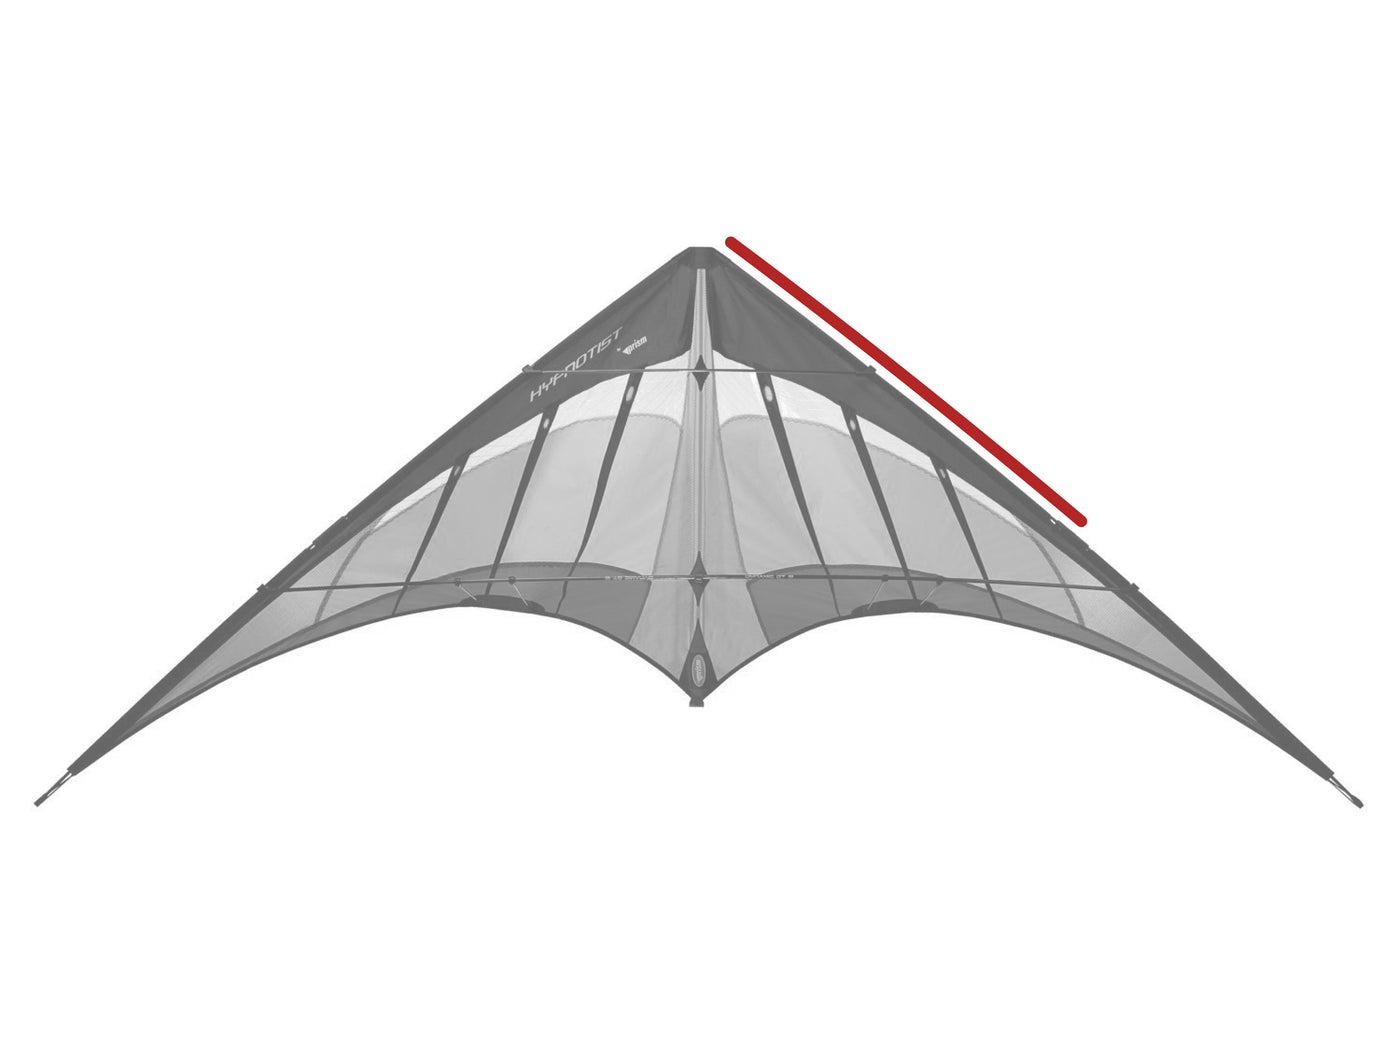 Diagram showing location of the Hypnotist Upper Leading Edge on the kite.